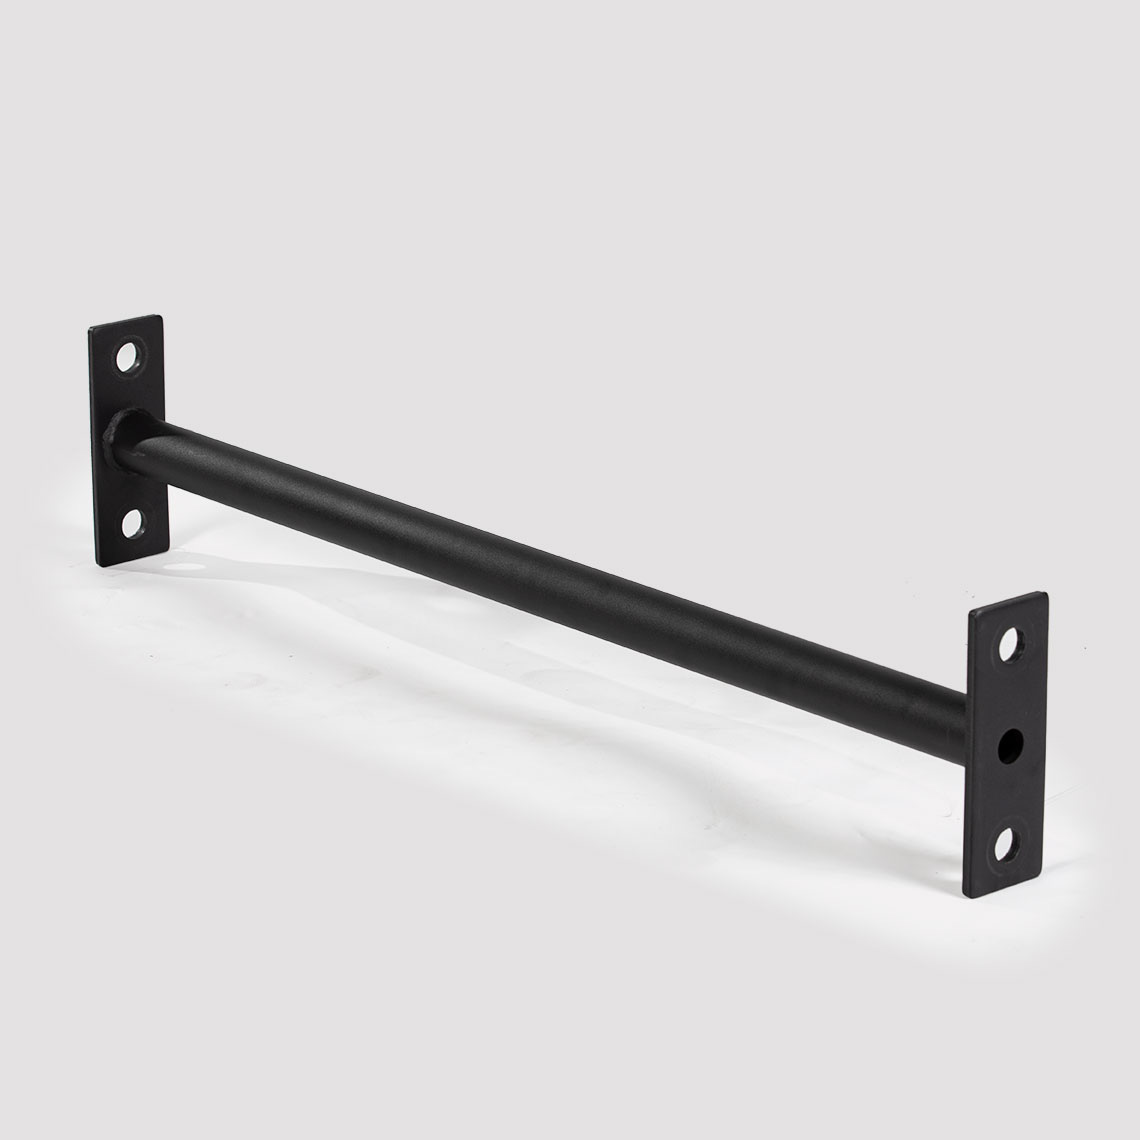 2-INCH FAT PULL-UP BAR